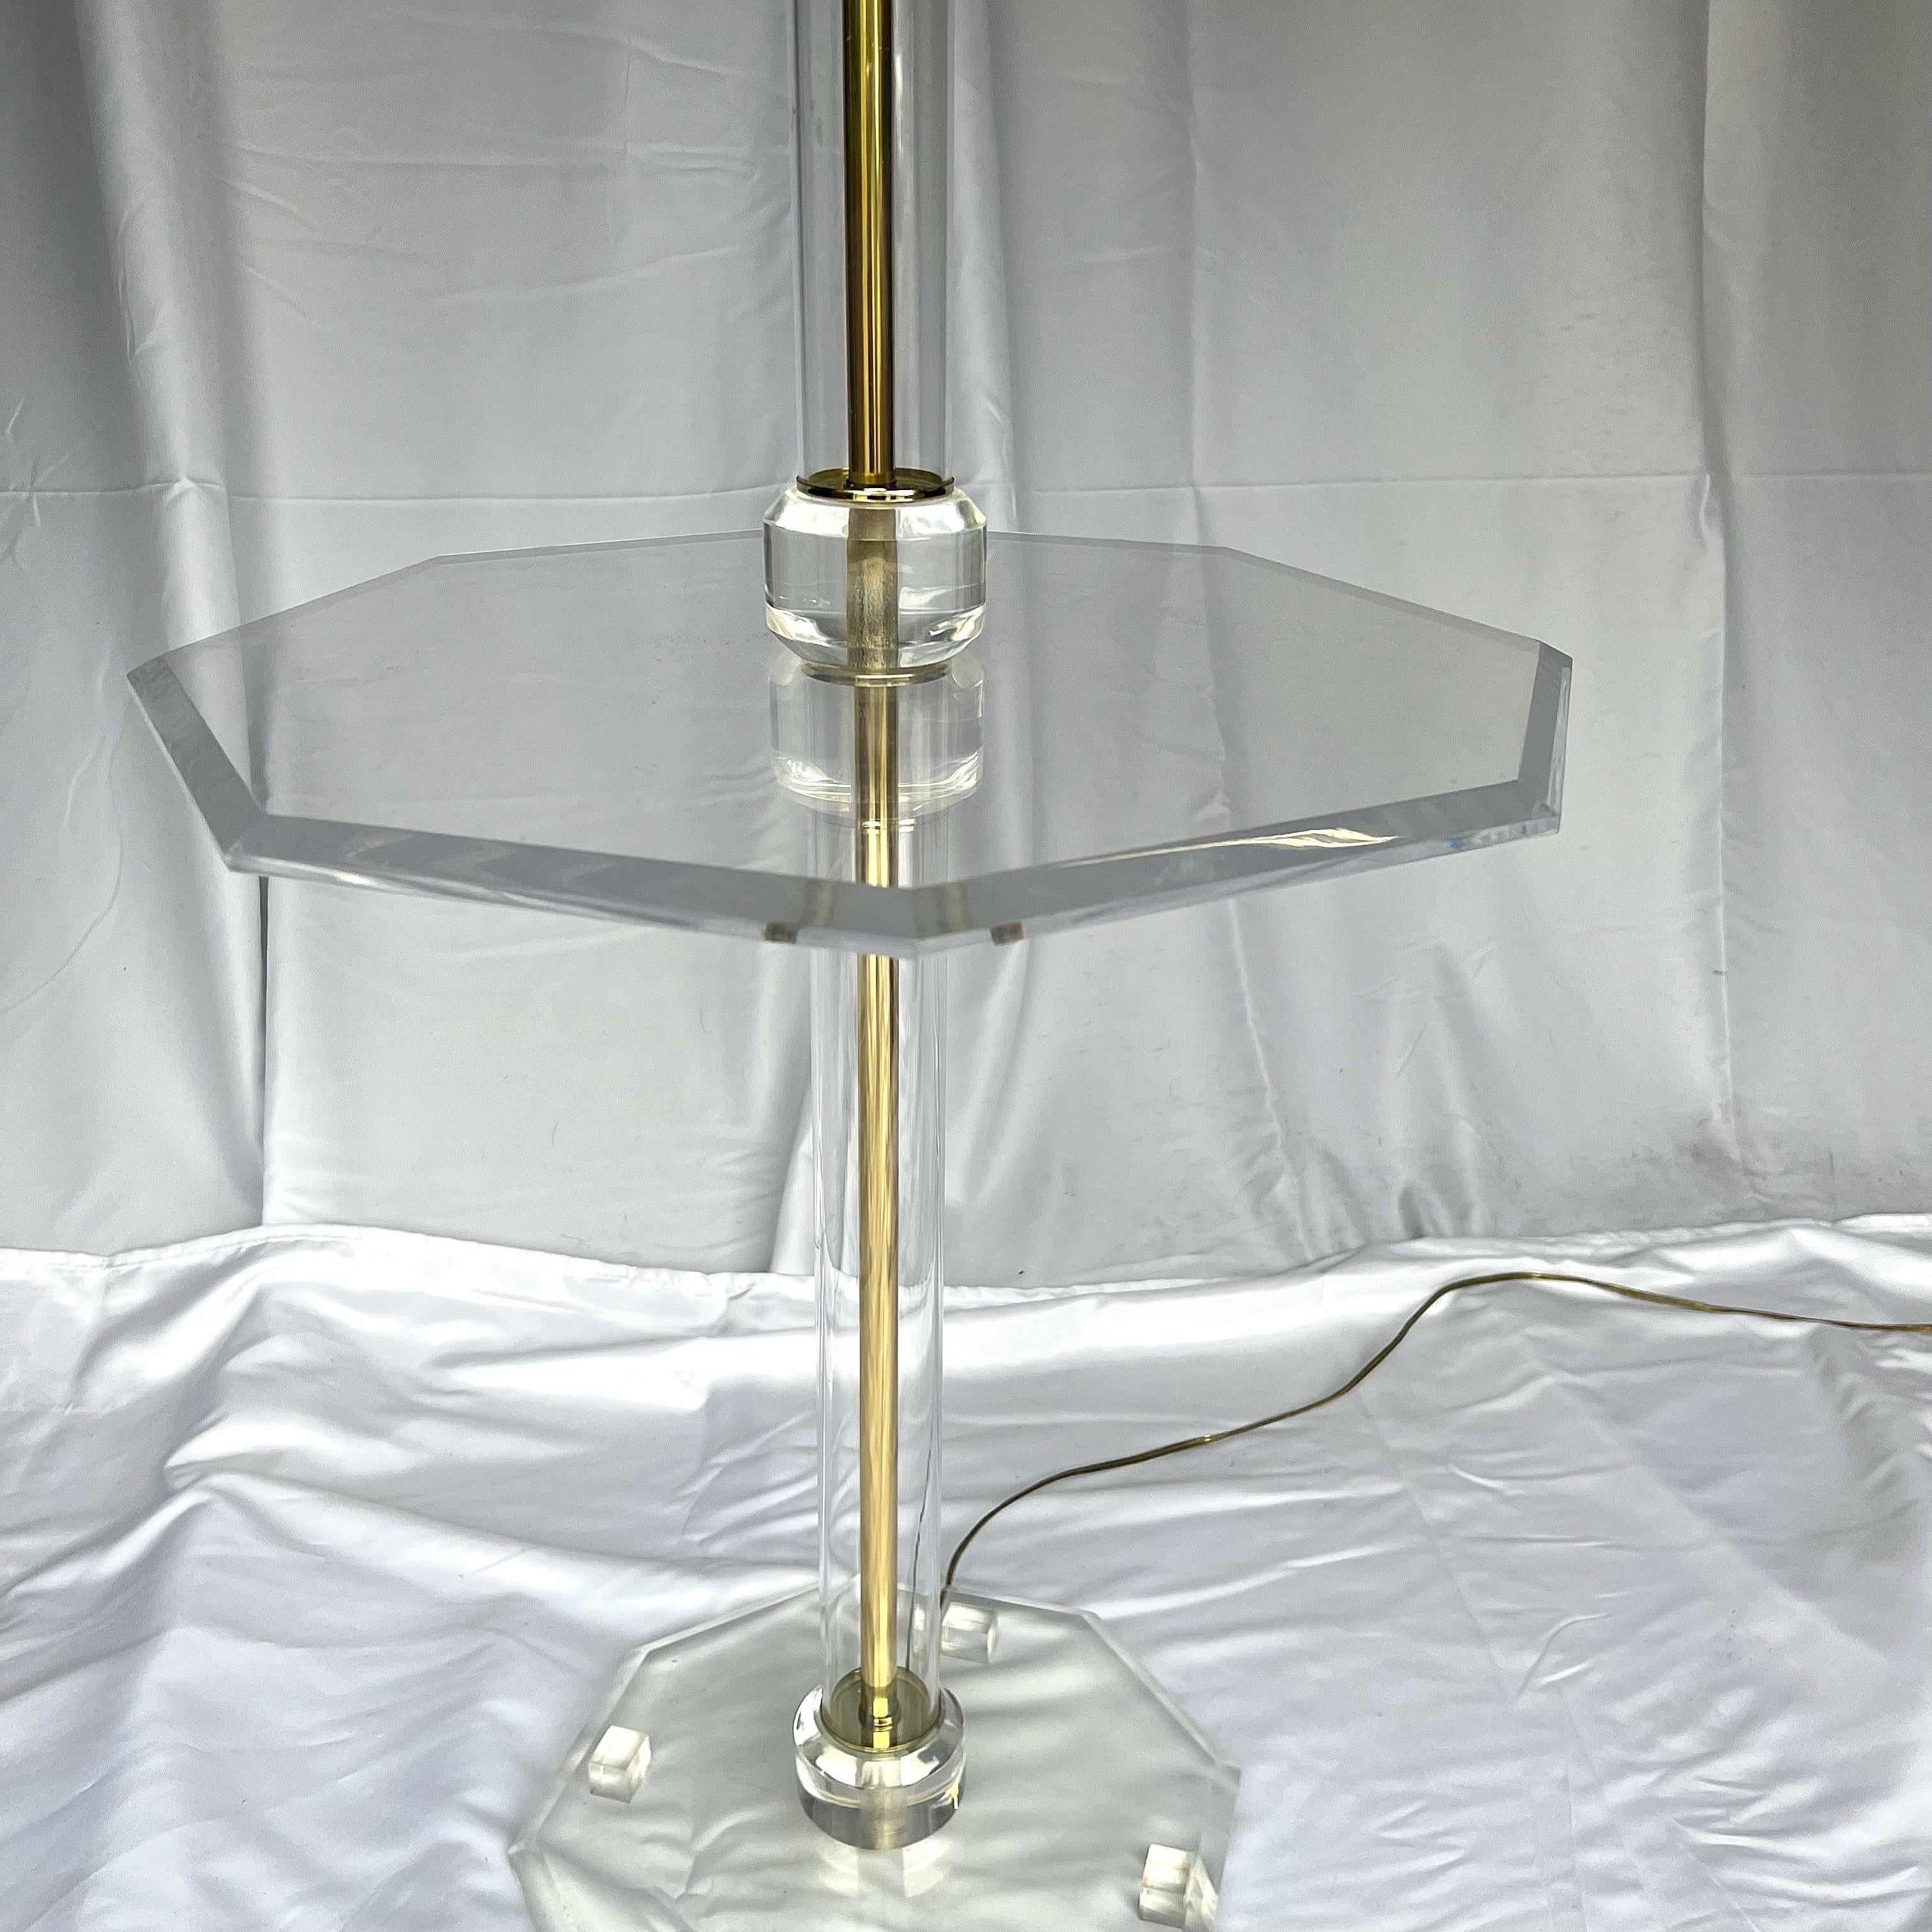 1970’s Mid-Century Modern Lucite Floor Lamp With Integrated Table For Sale 1